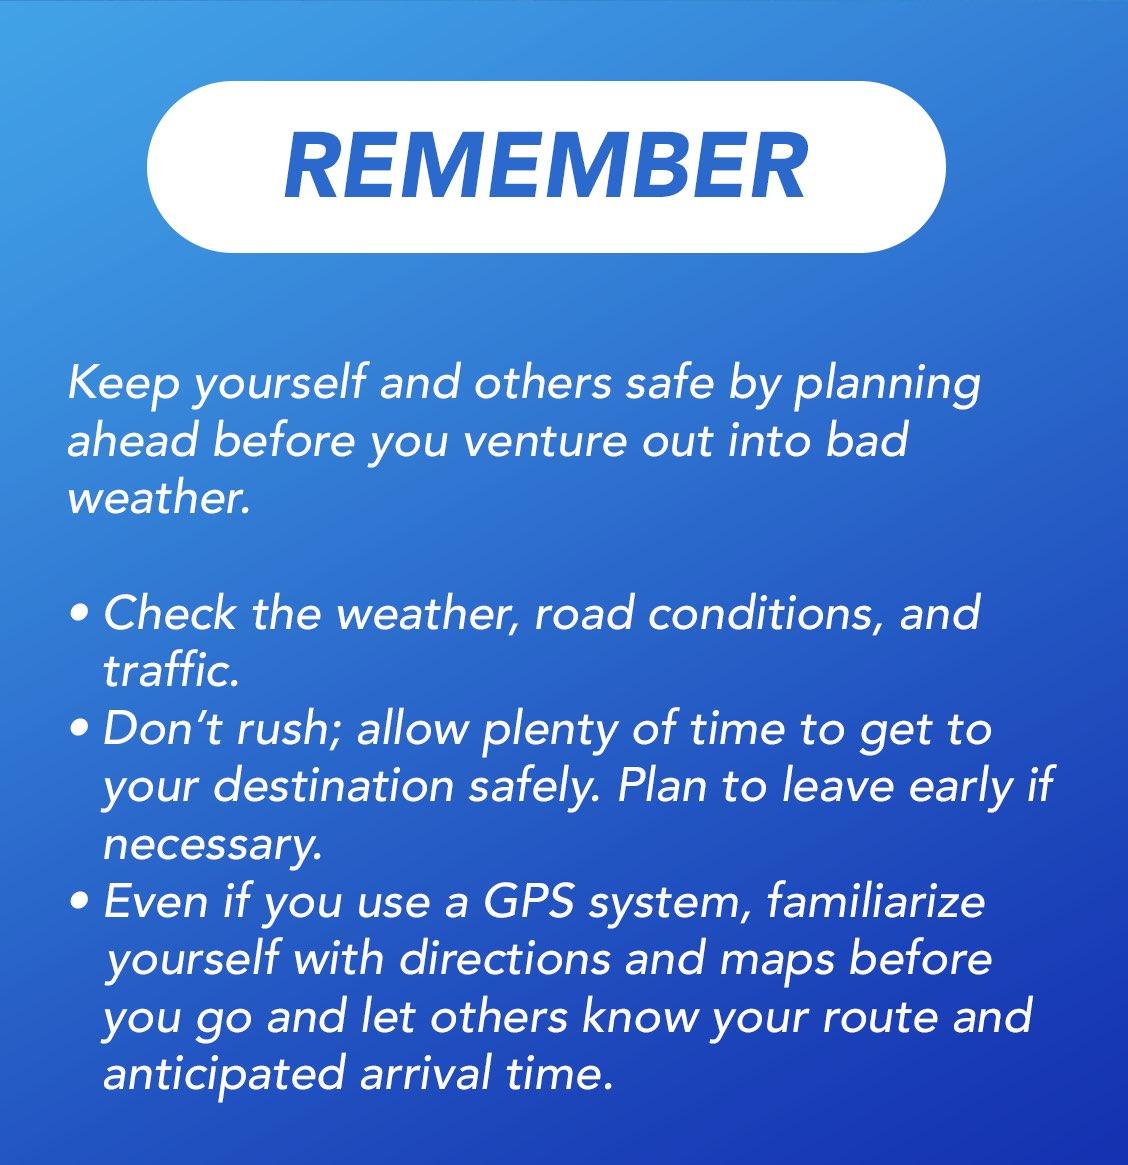 Keep yourself and others safe by planning ahead before you venture out into bad weather.